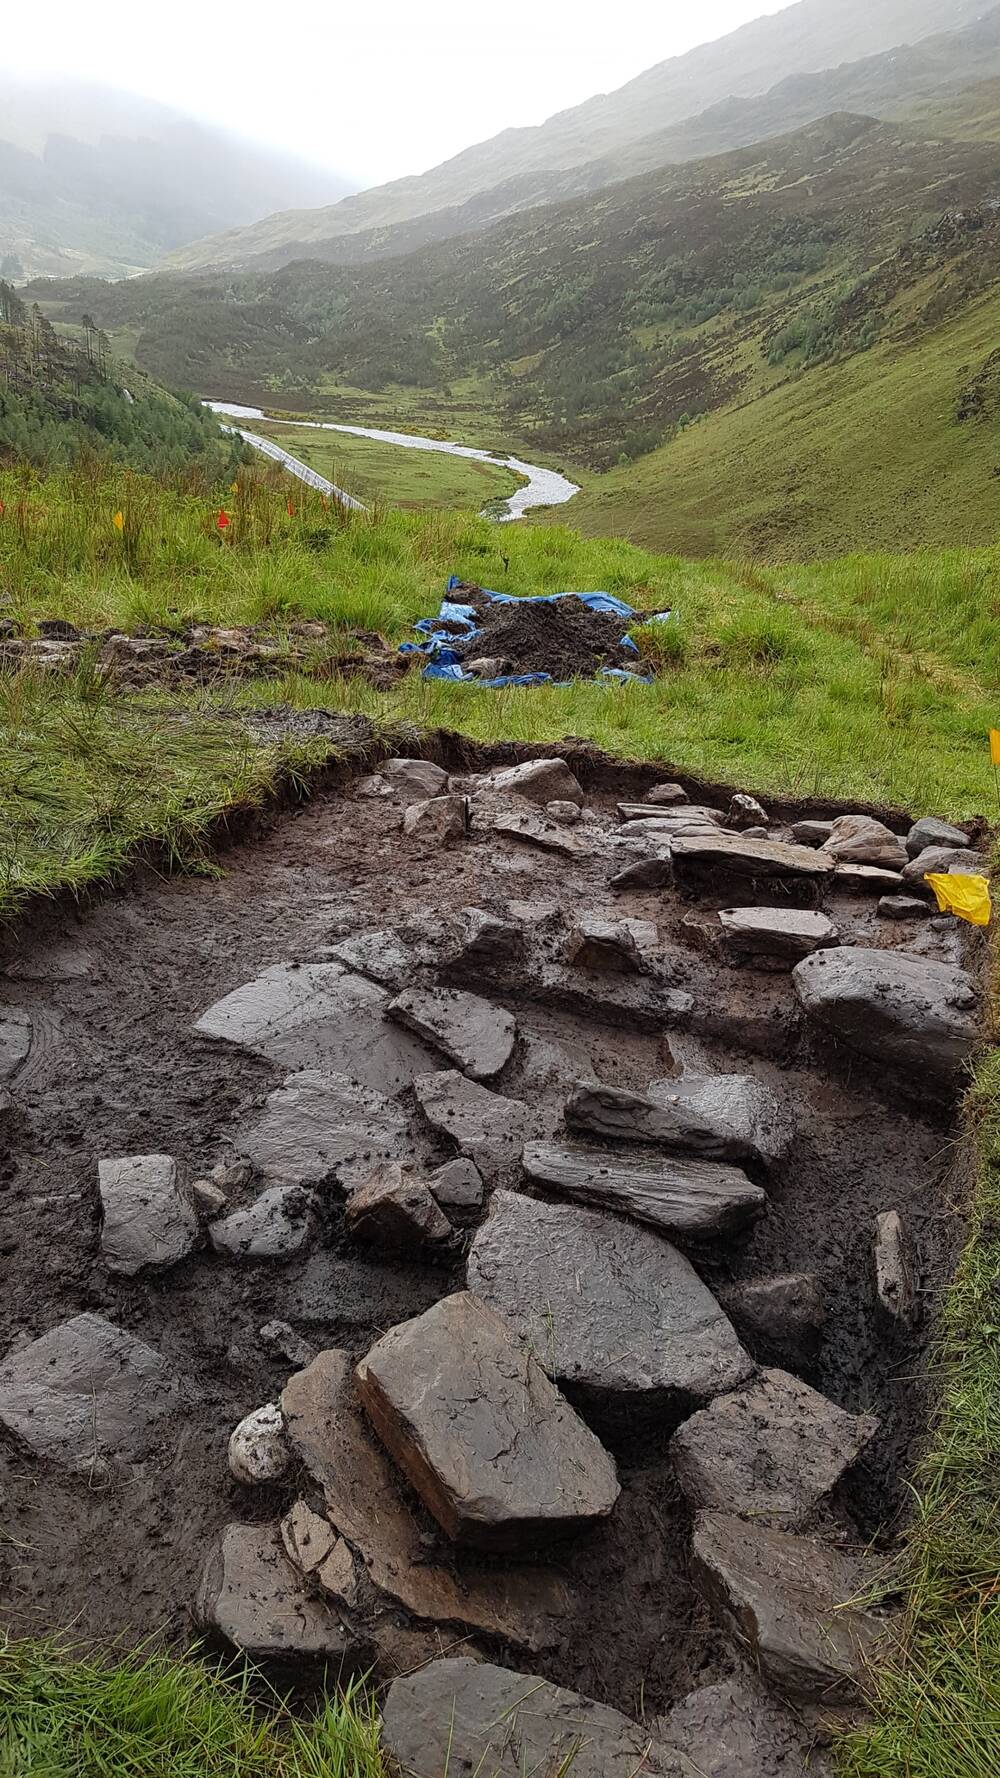 Stones uncovered by an archaeological dig in a remote valley, which is shrouded in drizzle.